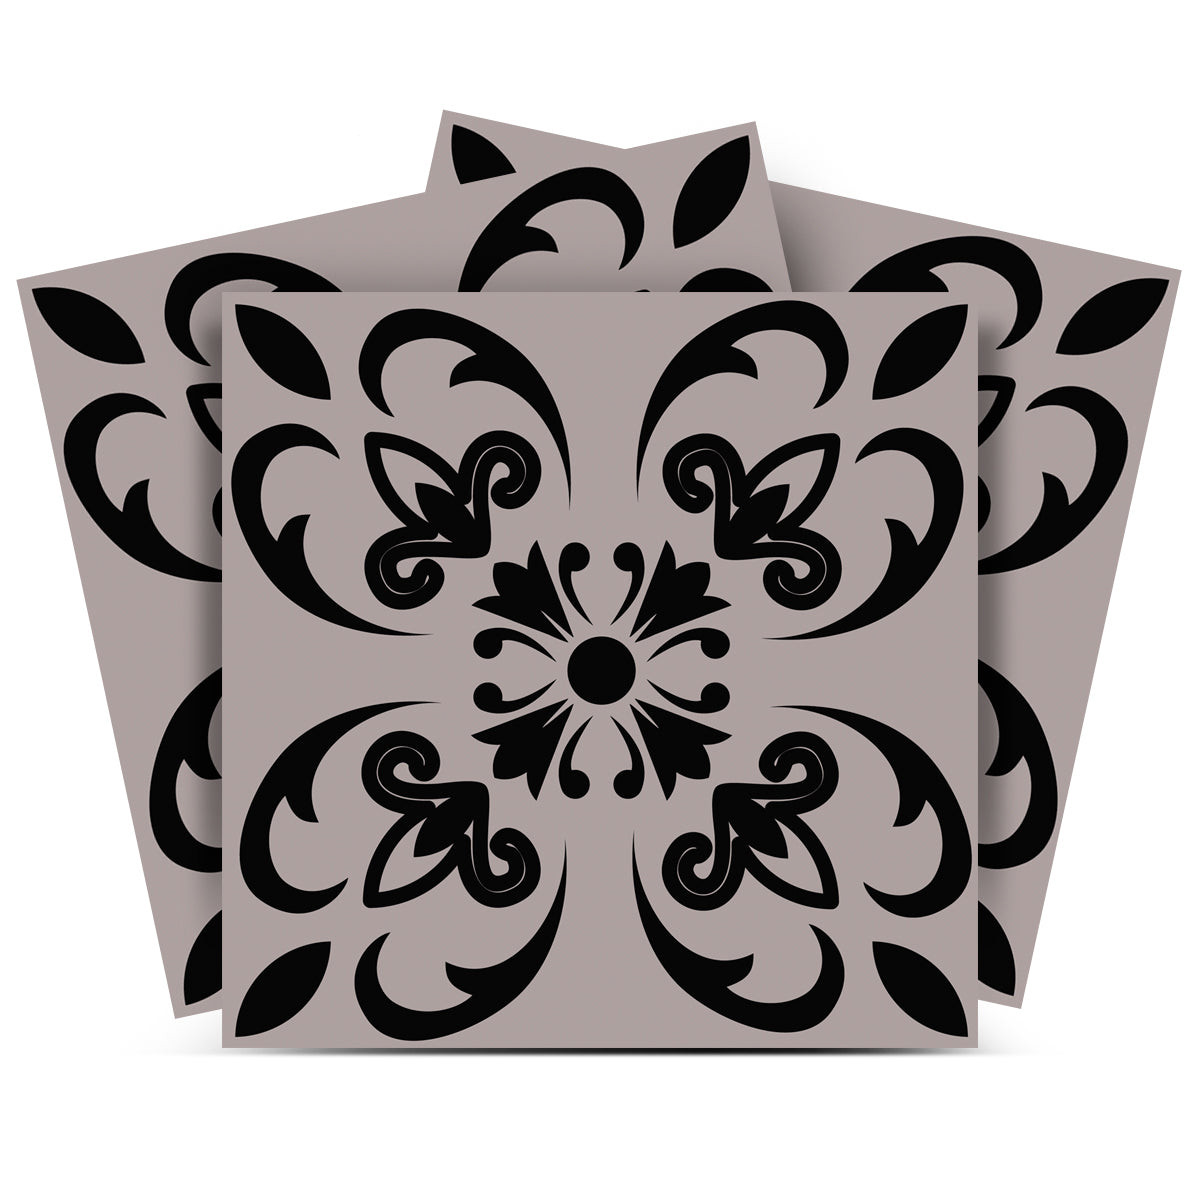 7" X 7" Black And White Orchid Peel And Stick Removable Tiles-390781-1